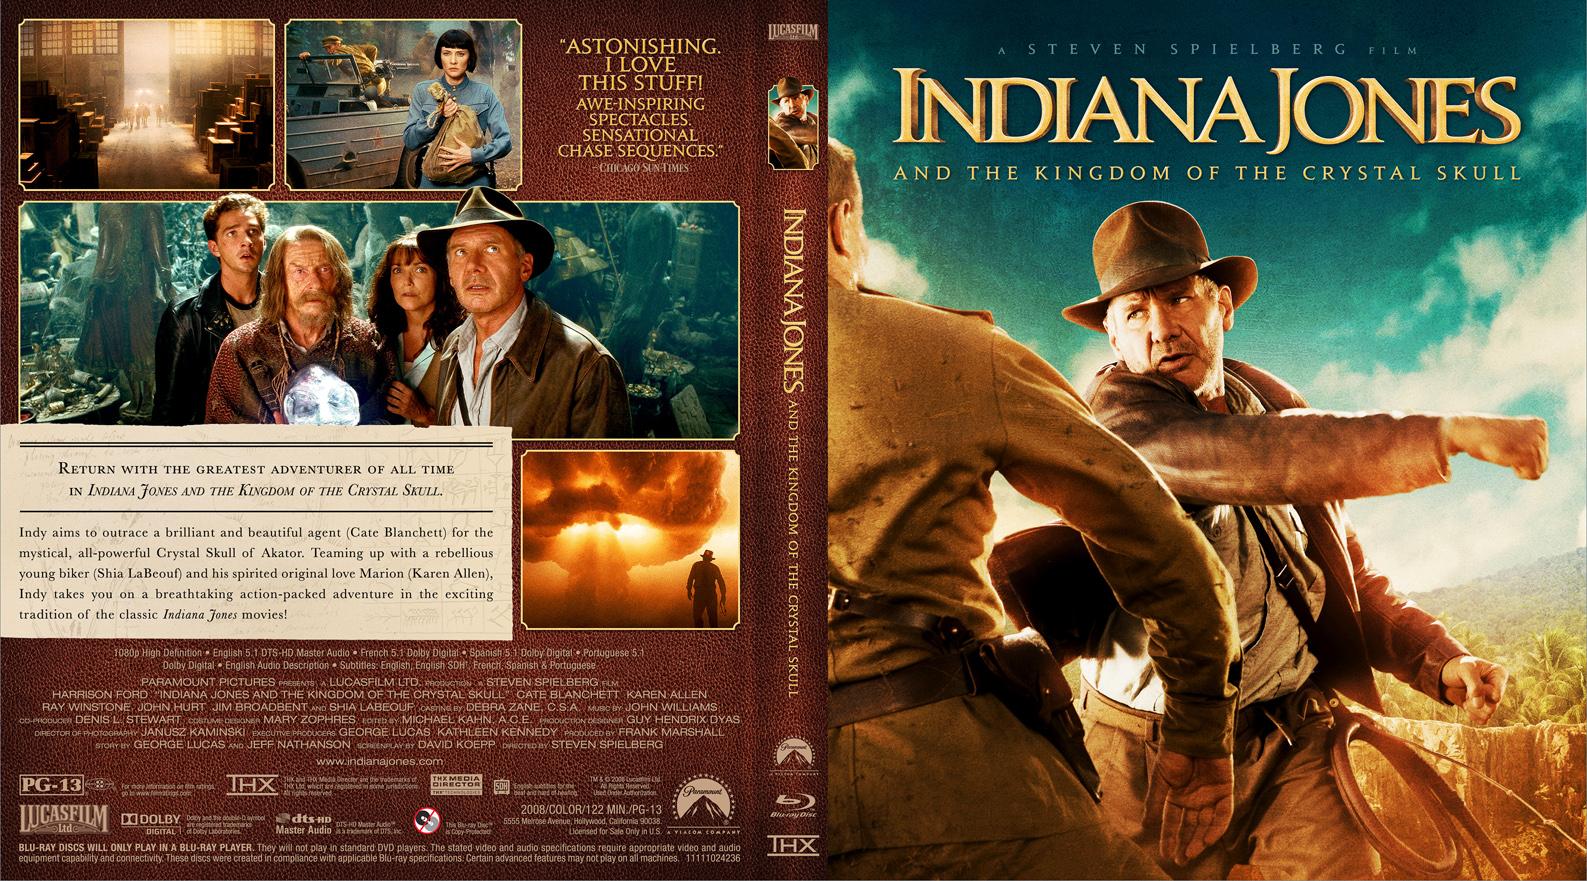 Indiana Jones And The Kingdom Of The Crystal Skull Backgrounds, Compatible - PC, Mobile, Gadgets| 1587x881 px